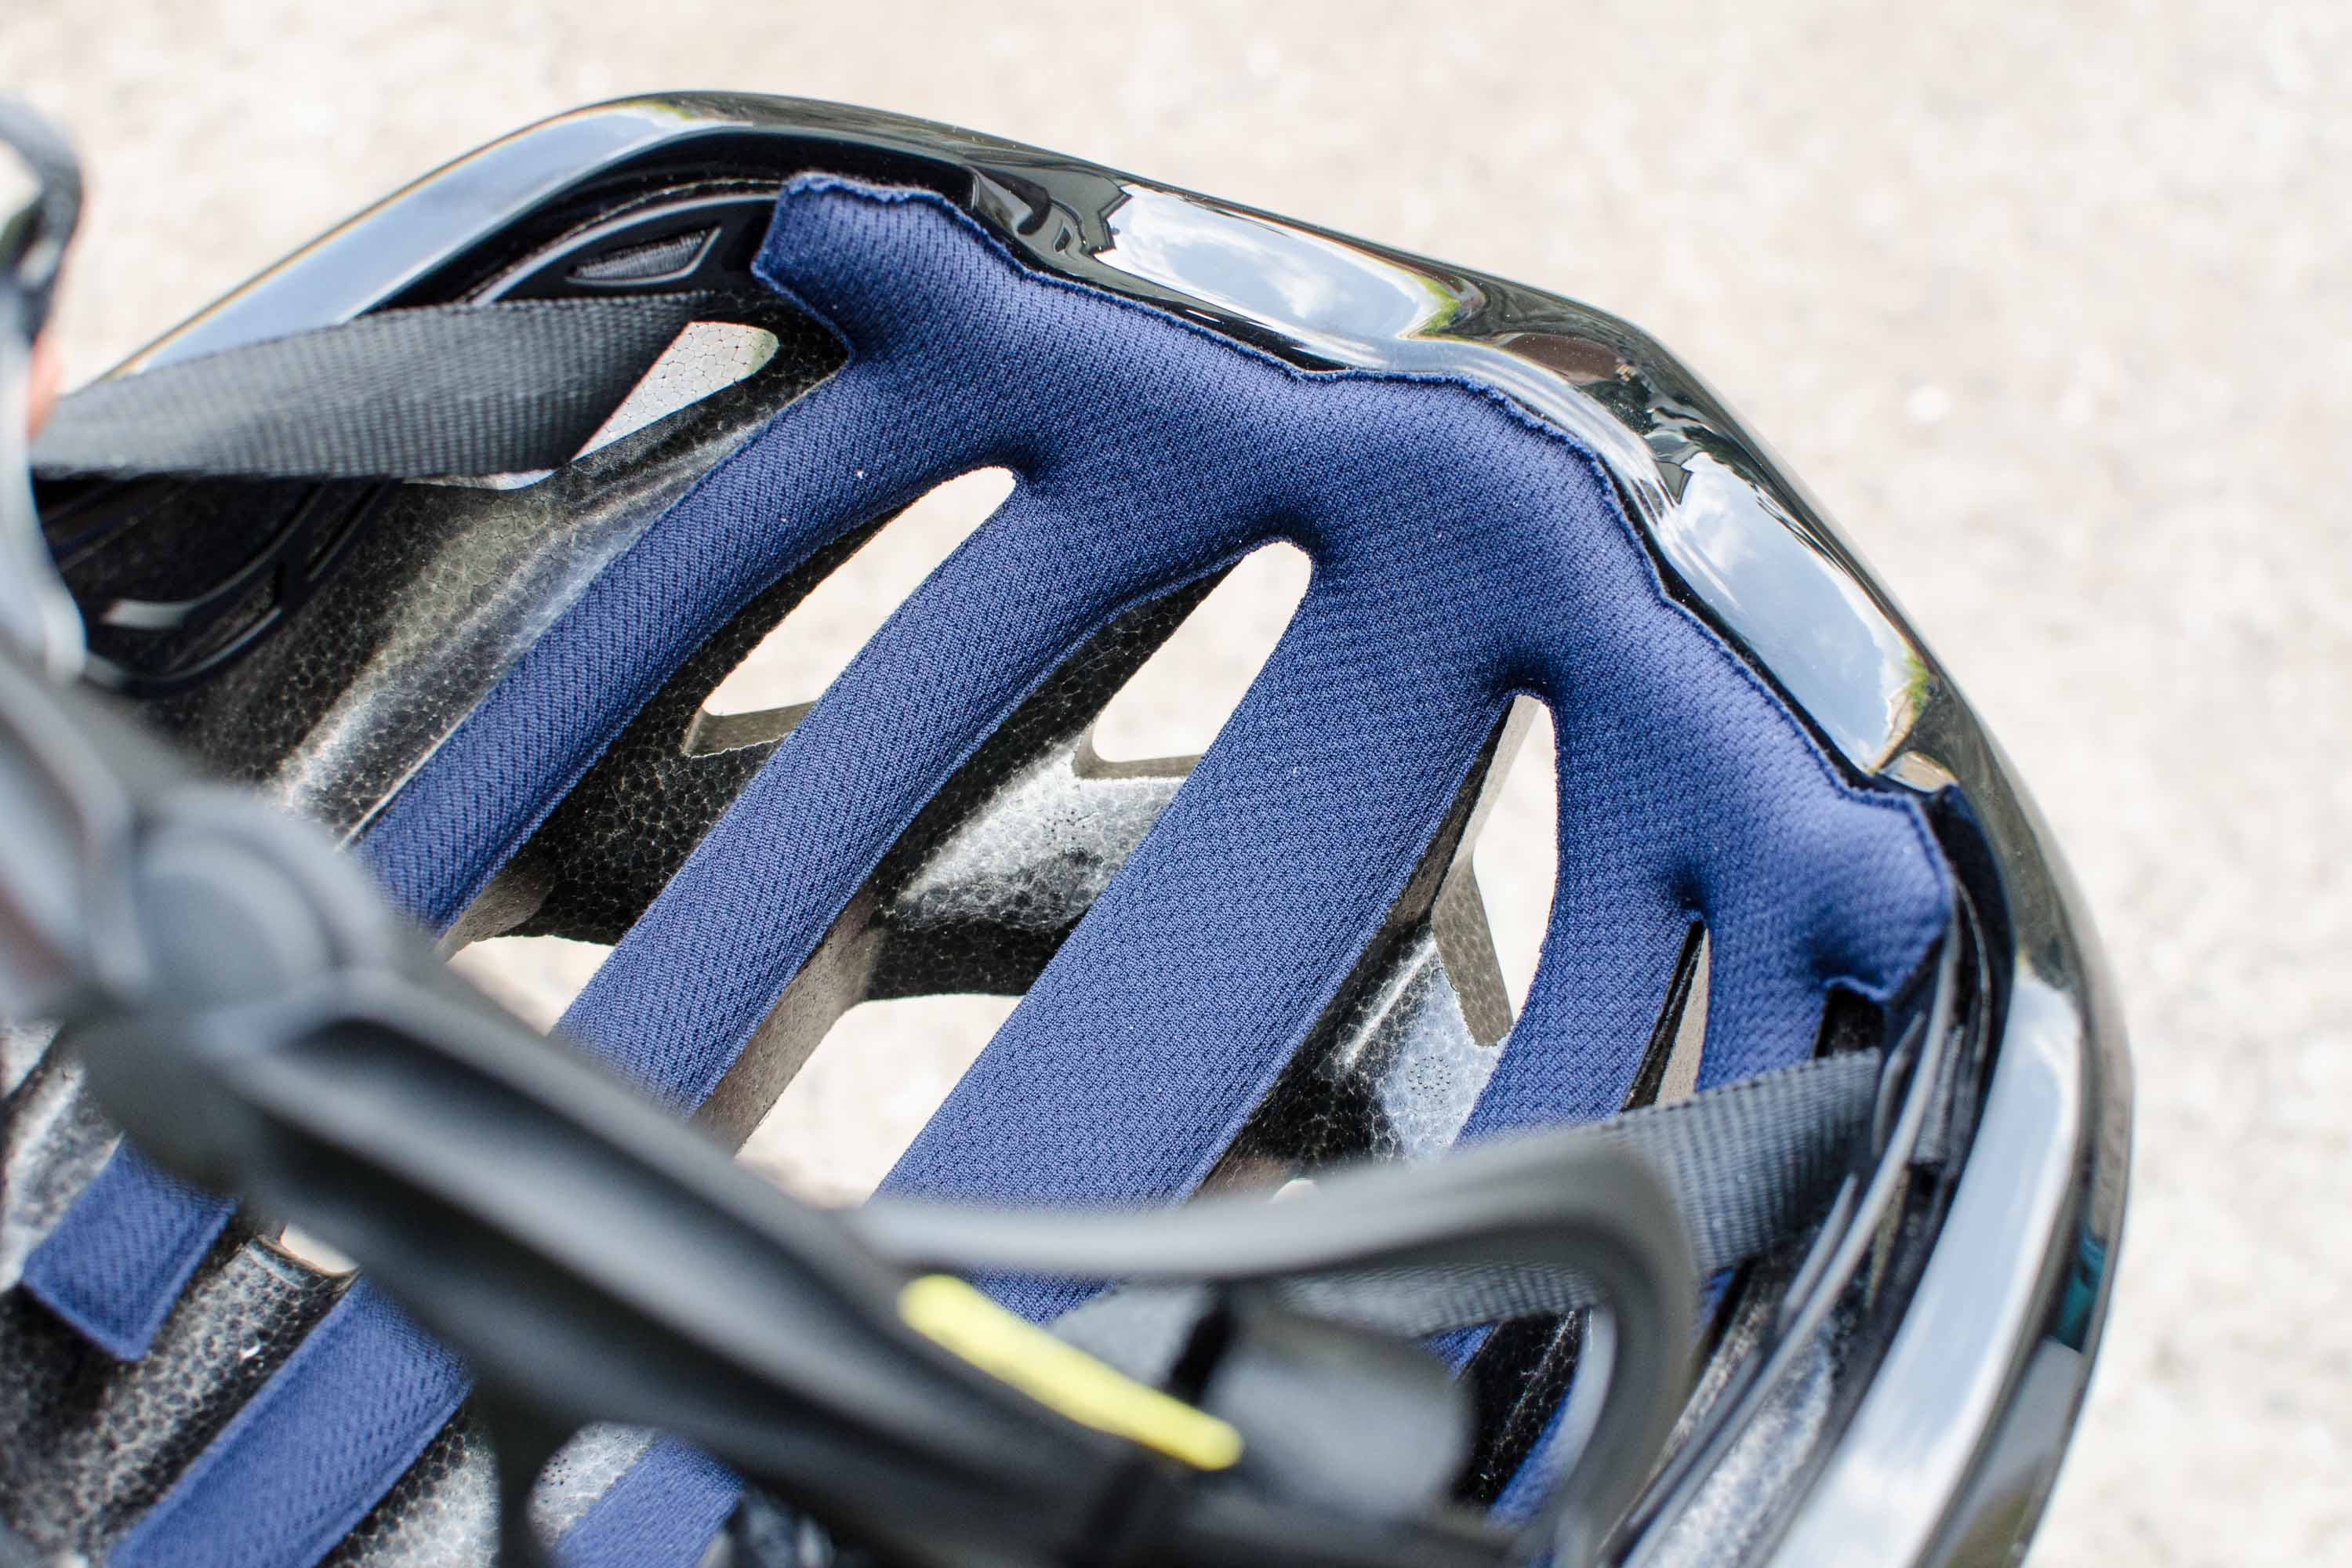 Review: Kask Mojito3 |